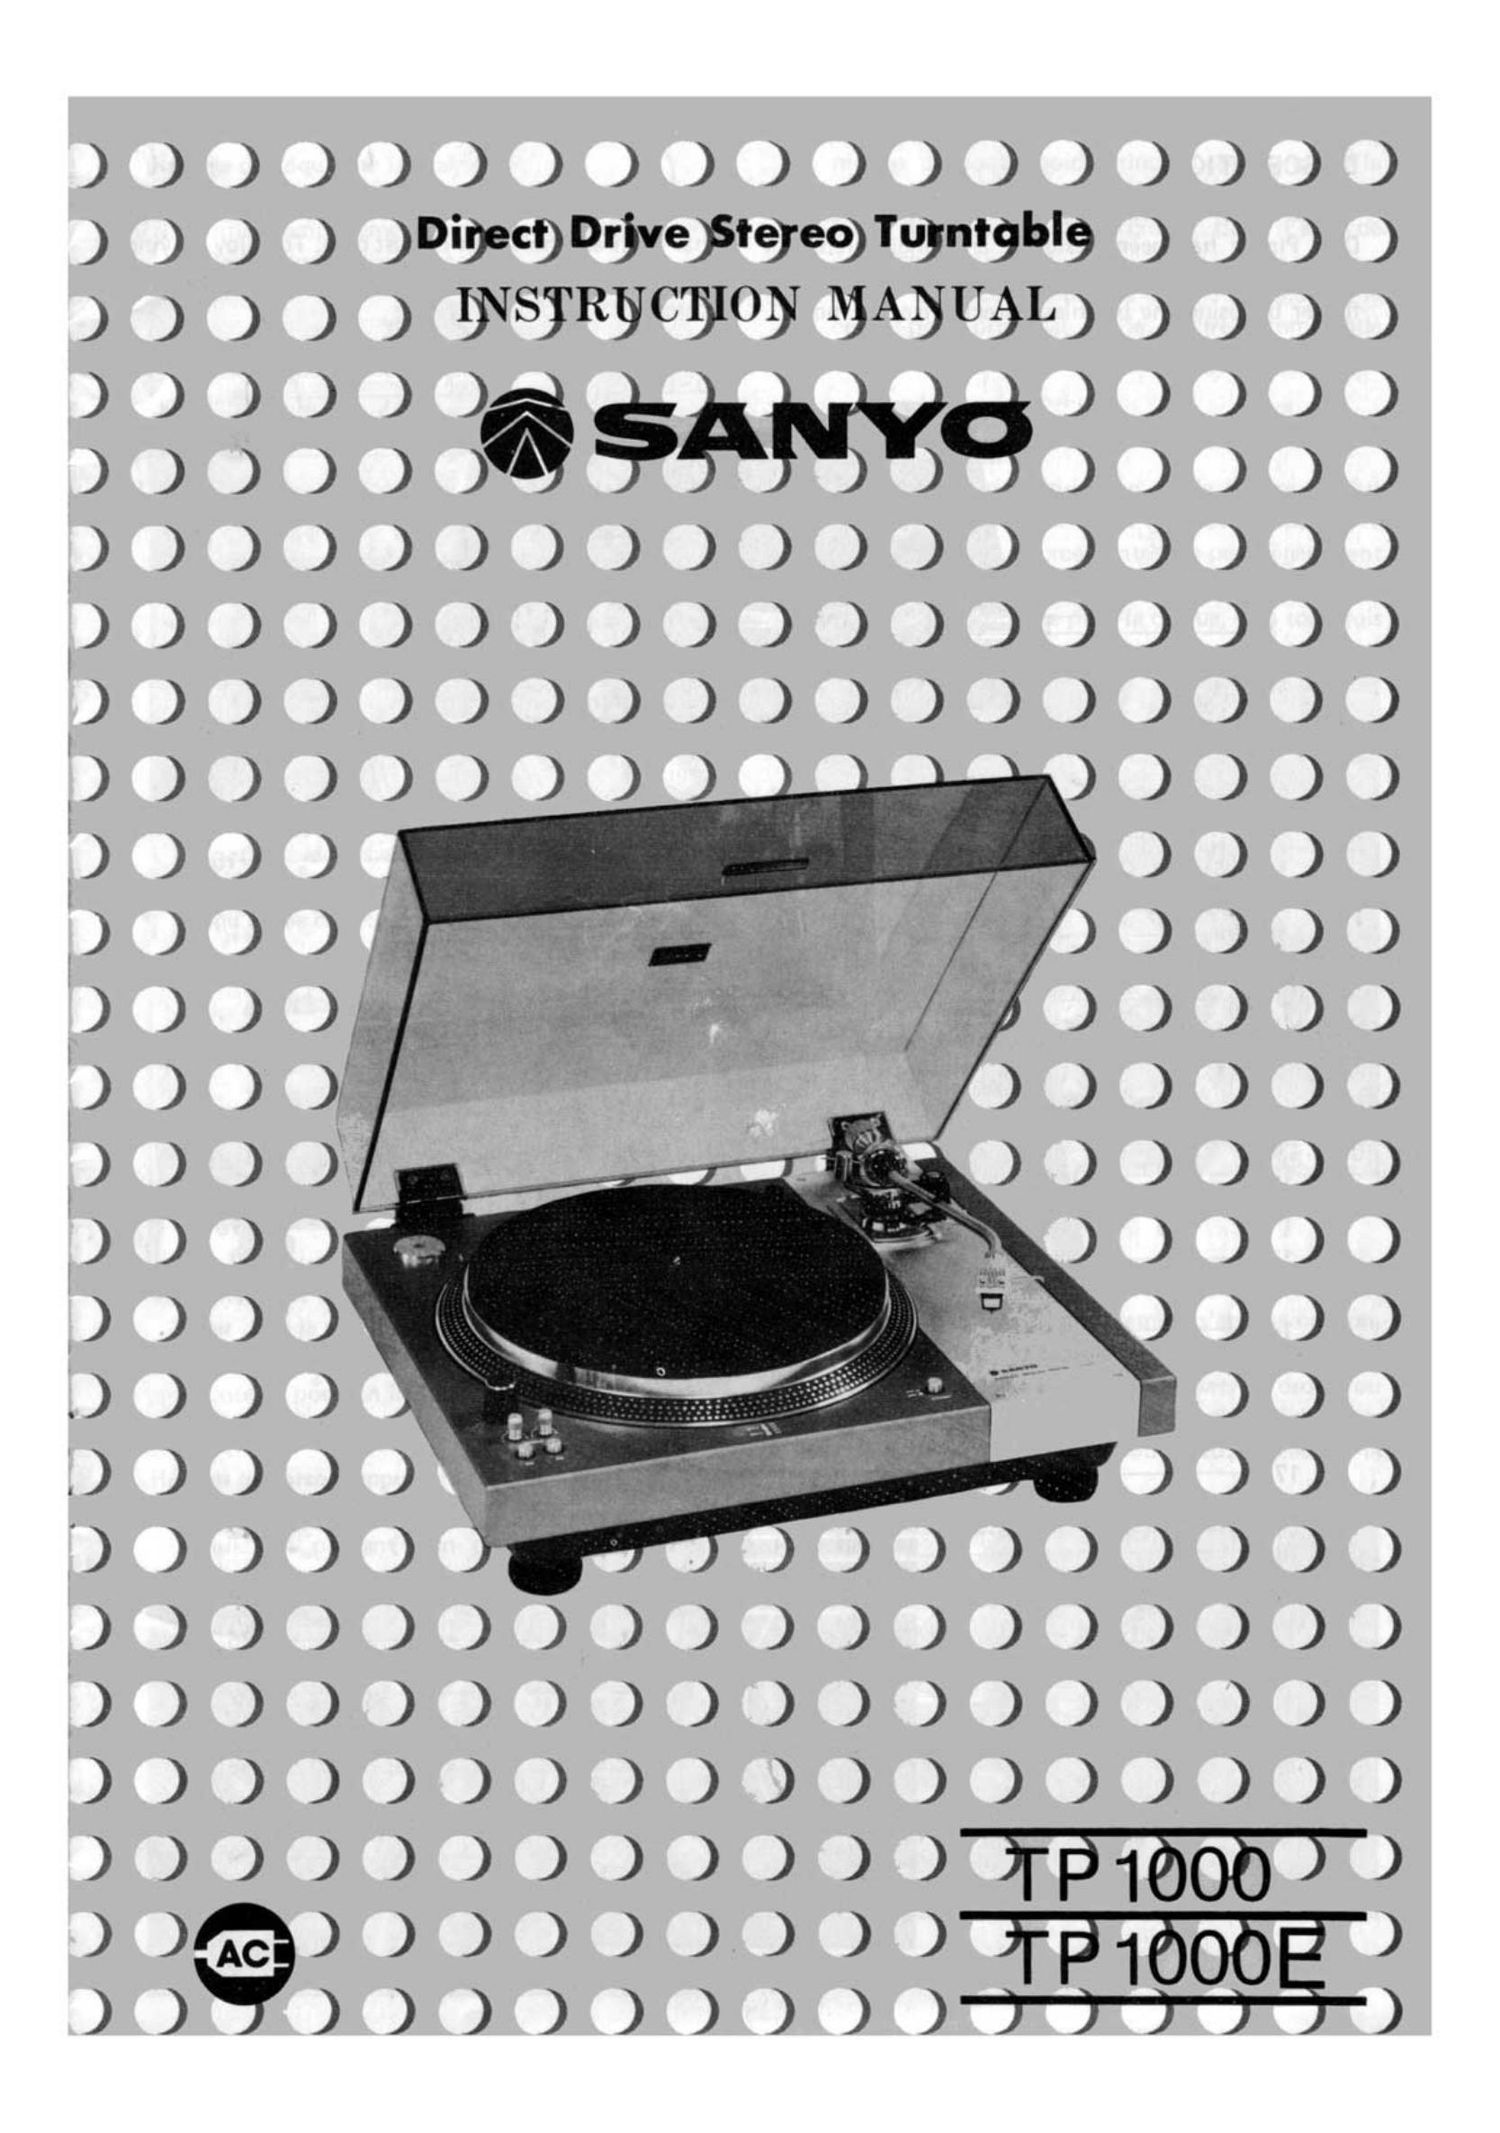 Sanyo TP 1000 Owners Manual